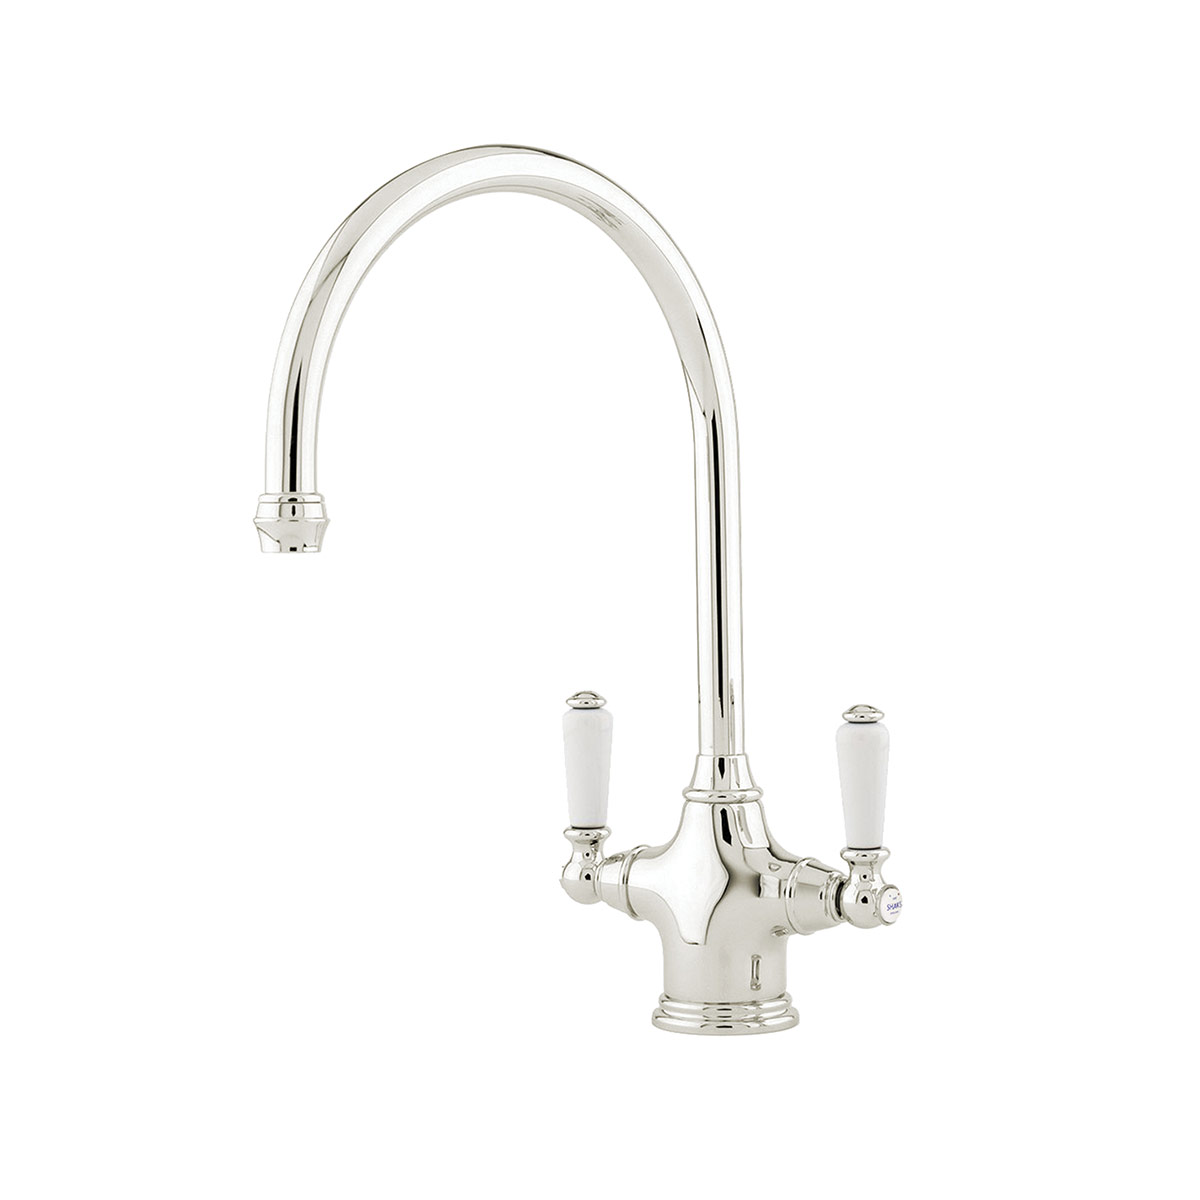 Shaws by Perrin & Rowe Ribble kitchen mixer in Nickel. Phoenician style monobloc kitchen tap AUSH.4460. Distributed in Australia by Luxe by Design, Brisbane.